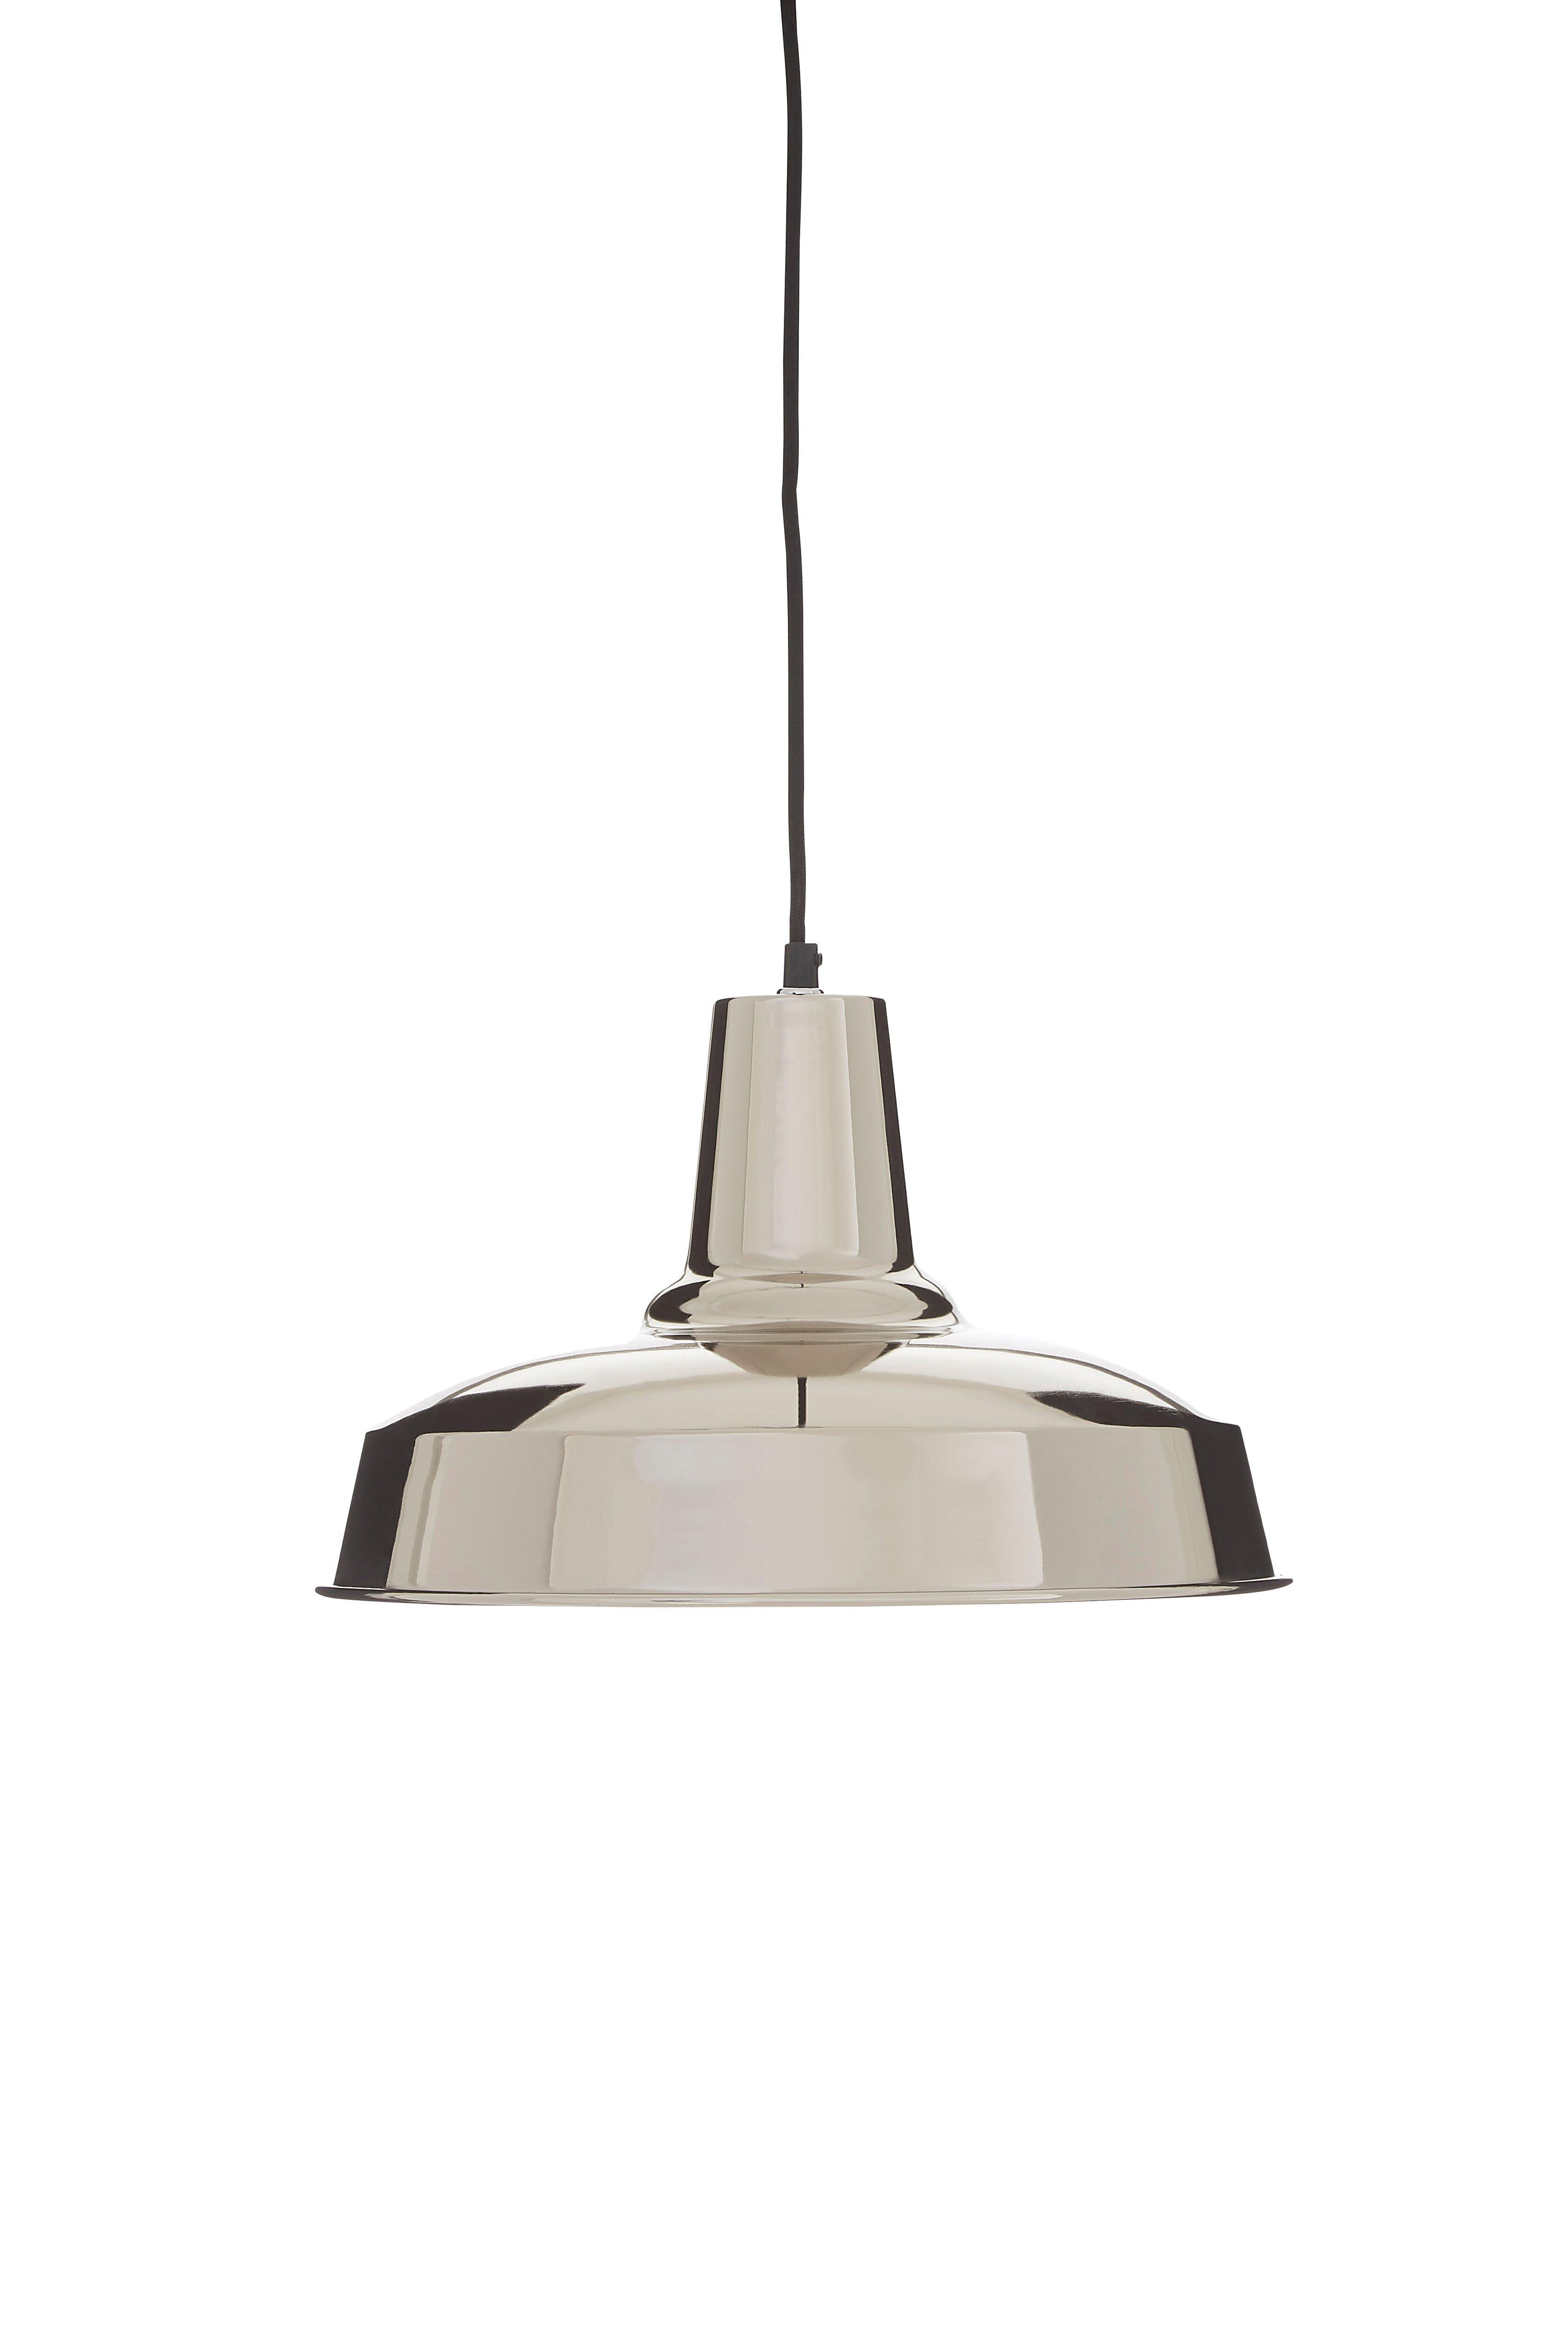 Interiors by Premier New Foundry Deep Plate Iron Pendant Light